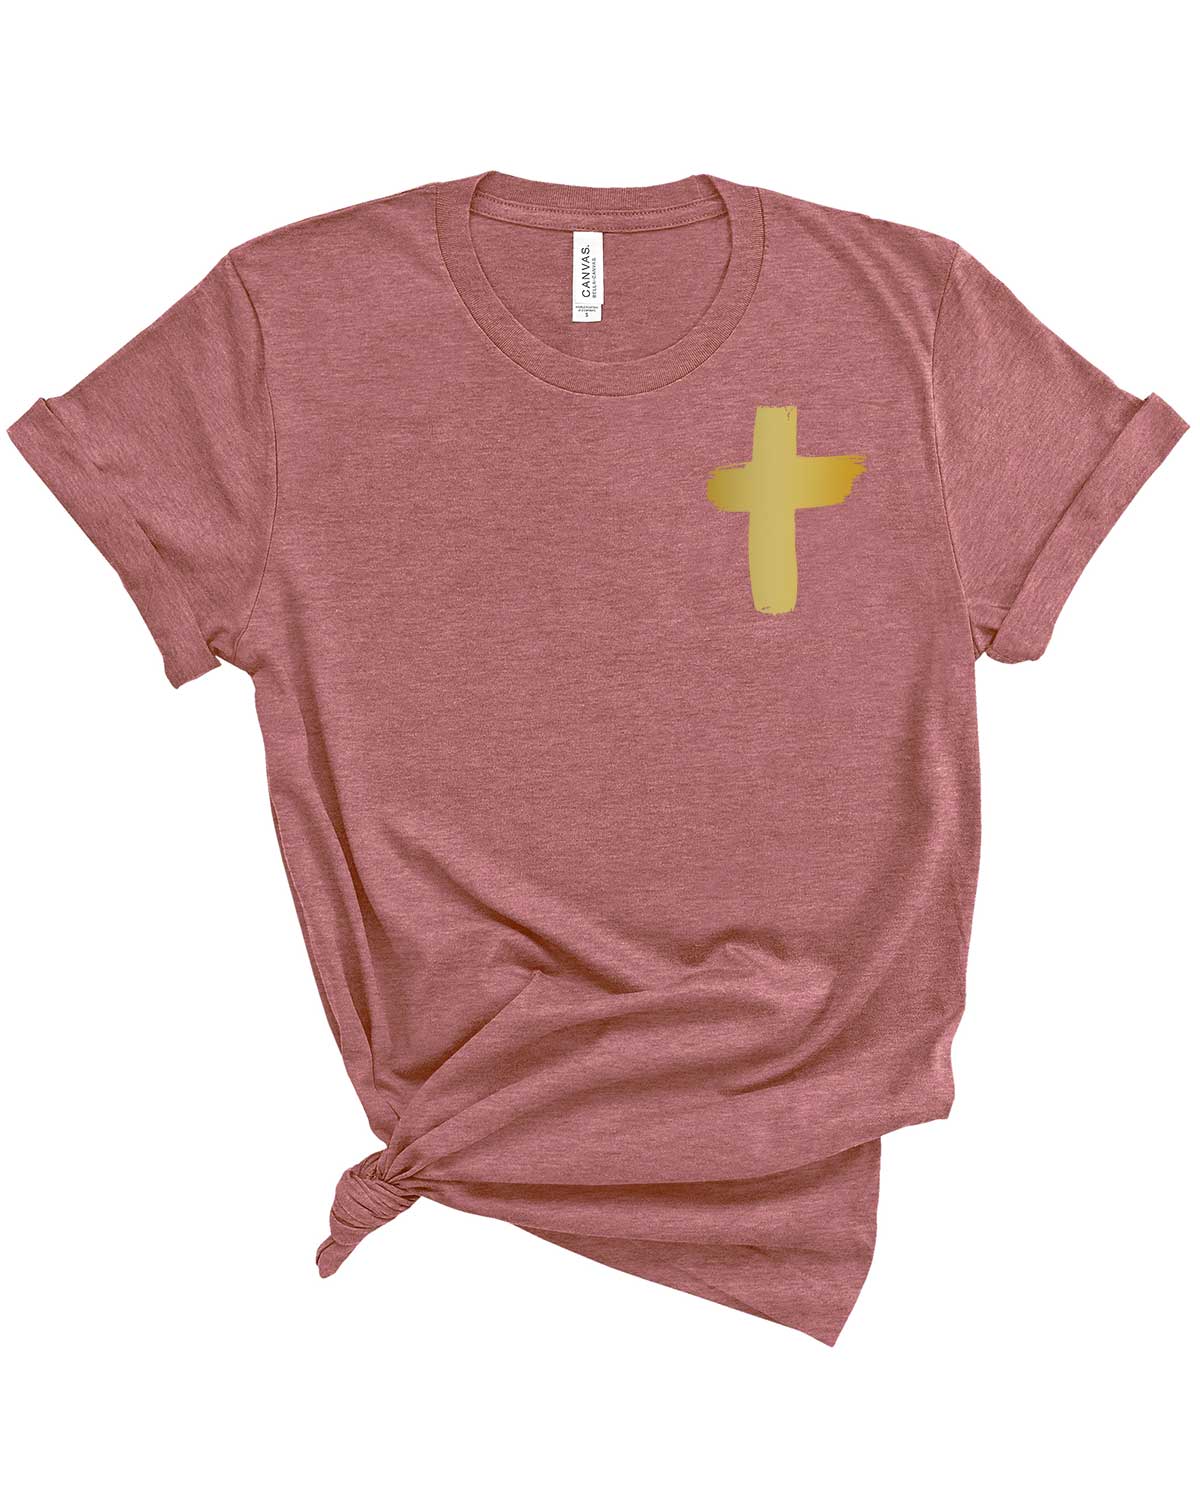 Gold Foil Cross | Tee | Adult-SS Activewear-Sister Shirts, Cute & Custom Tees for Mama & Littles in Trussville, Alabama.